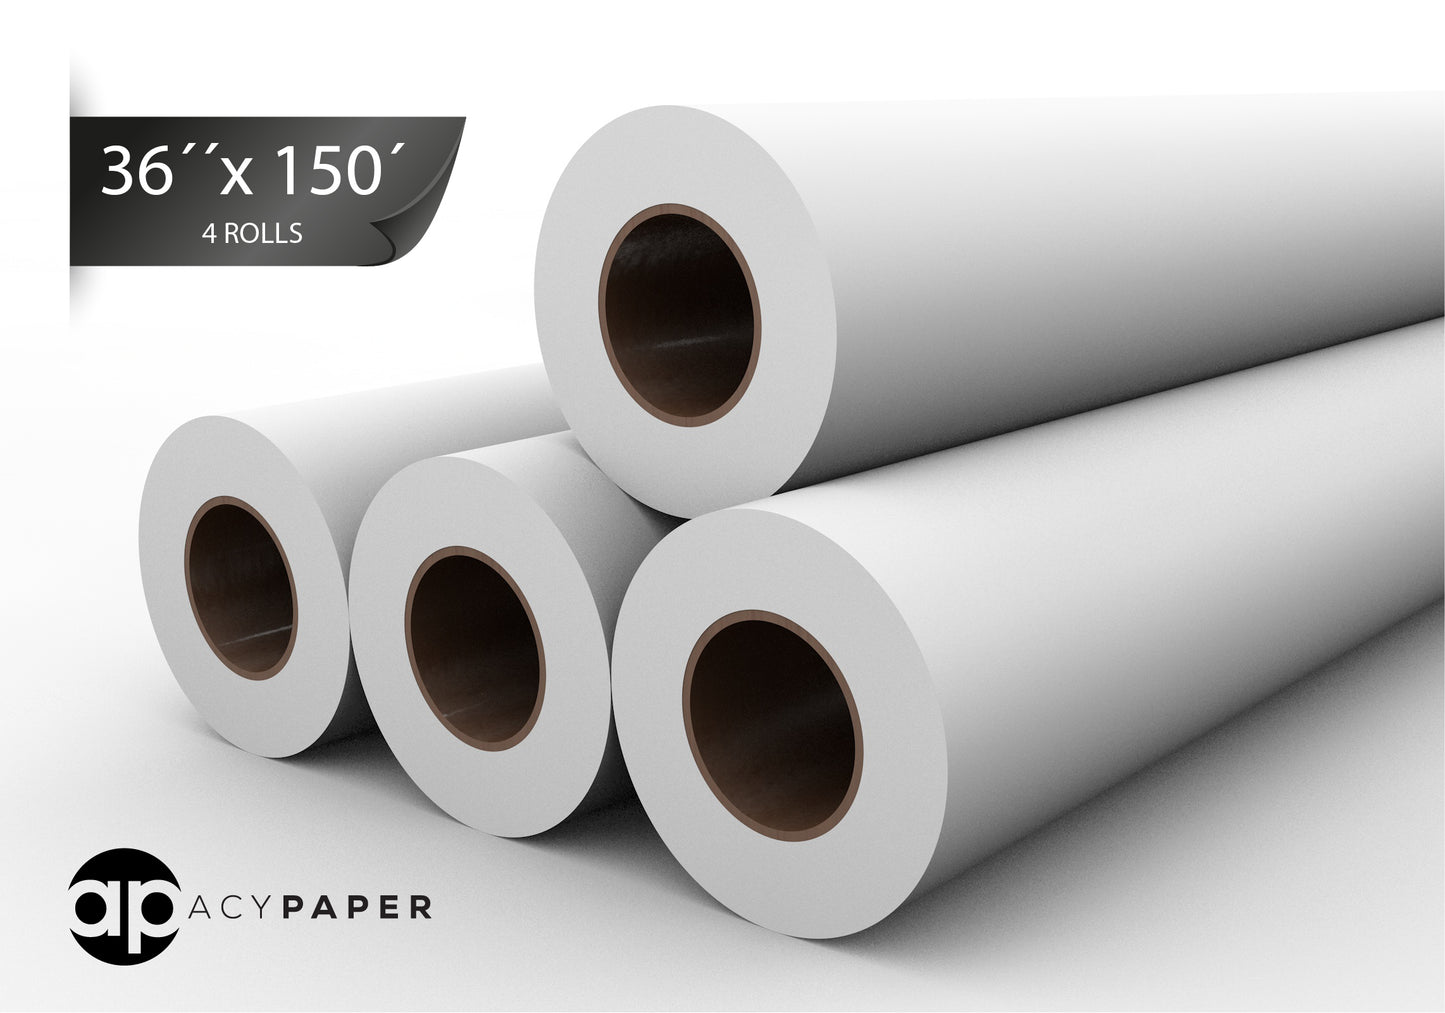 Plotter Paper 36 x 150, CAD Paper Rolls, 20 lb. Bond Paper on 2" Core for CAD Printing on Wide Format Ink Jet Printers, 4 Rolls per Box. Premium Quality